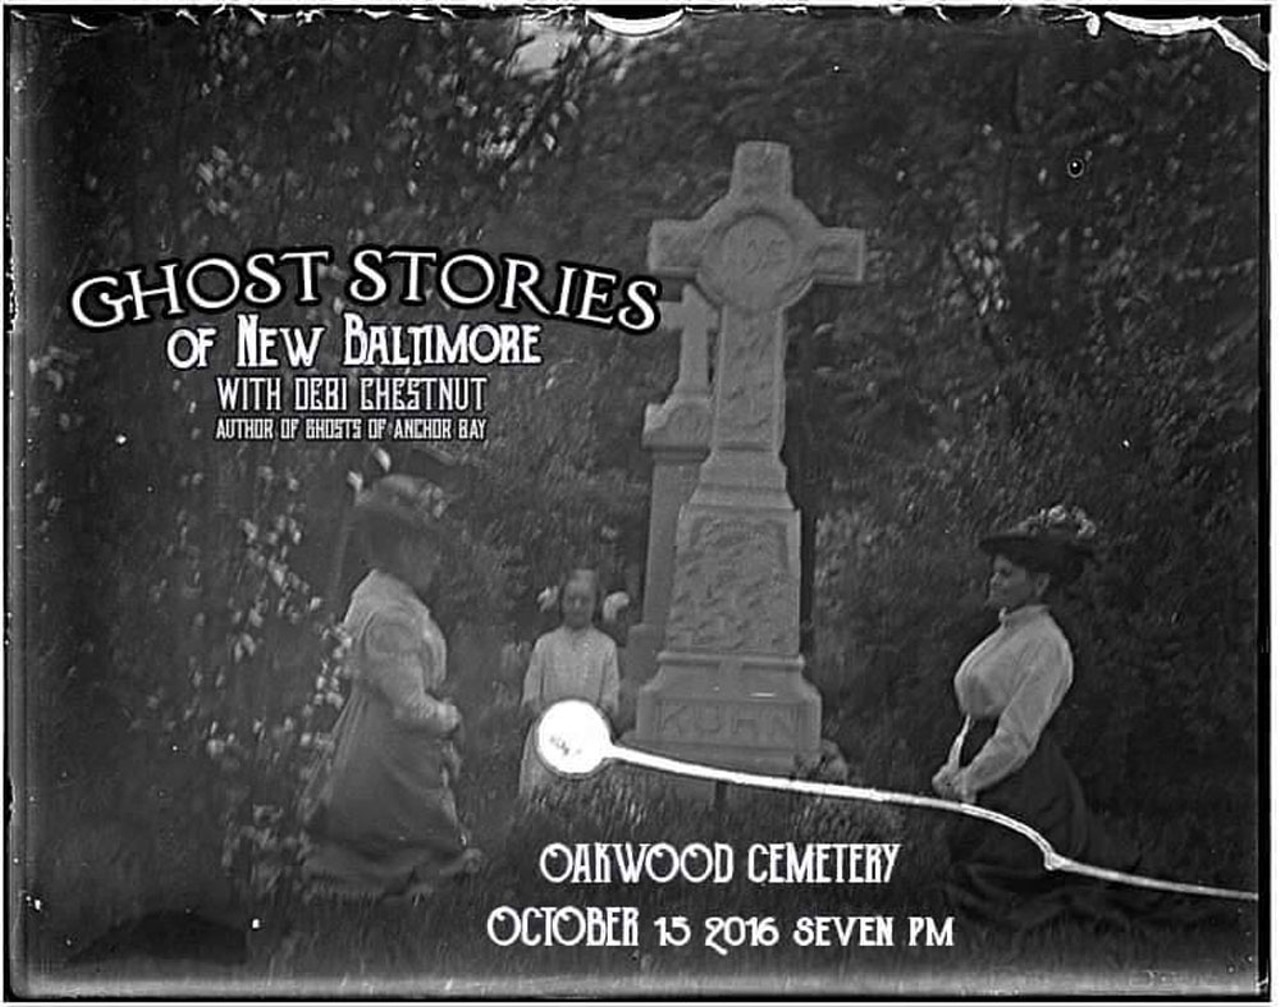 Ghost Stories of New Baltimore
So this one isn&#146;t a tour, but author Debi Chestnut will be reading from her book Ghosts of Anchor Bay in the oldest cemetery in New Baltimore under a full moon. So yeah...this is about to creepy. Saturday, October 15 @ Oakwood Cemetery. $5 admission. https://www.facebook.com/events/164262017355987/